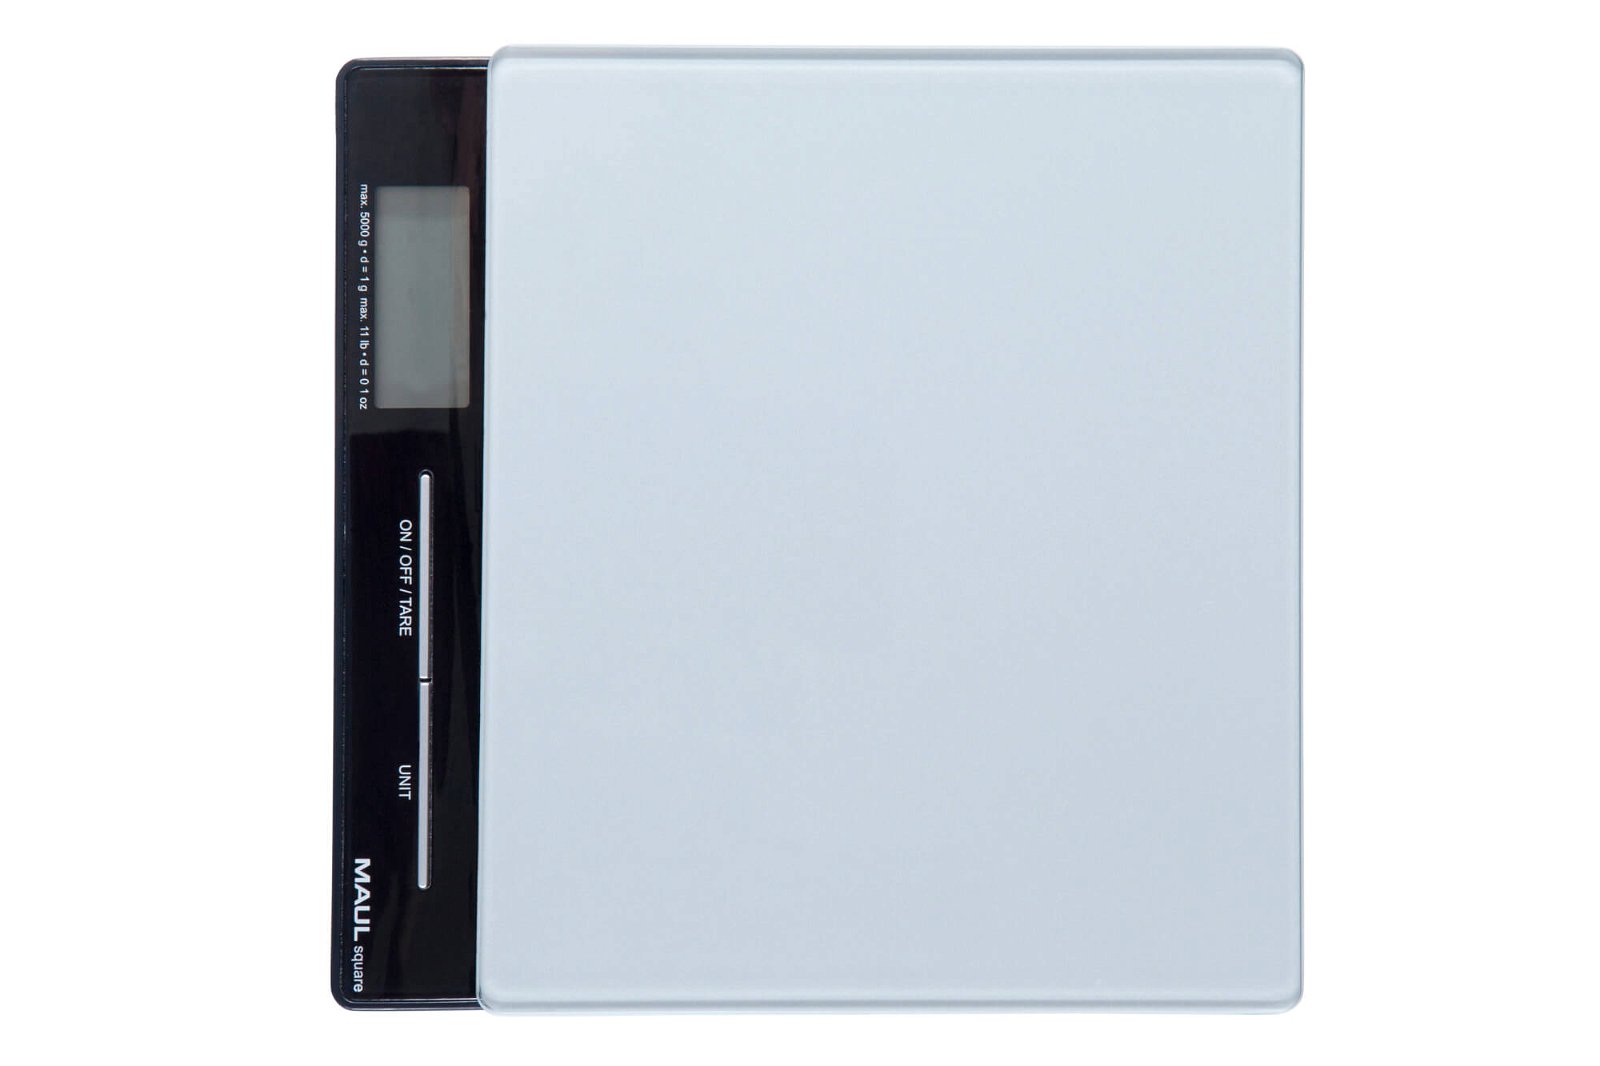 Briefwaage MAULsquare mit Batterie, 5000 g, silber 